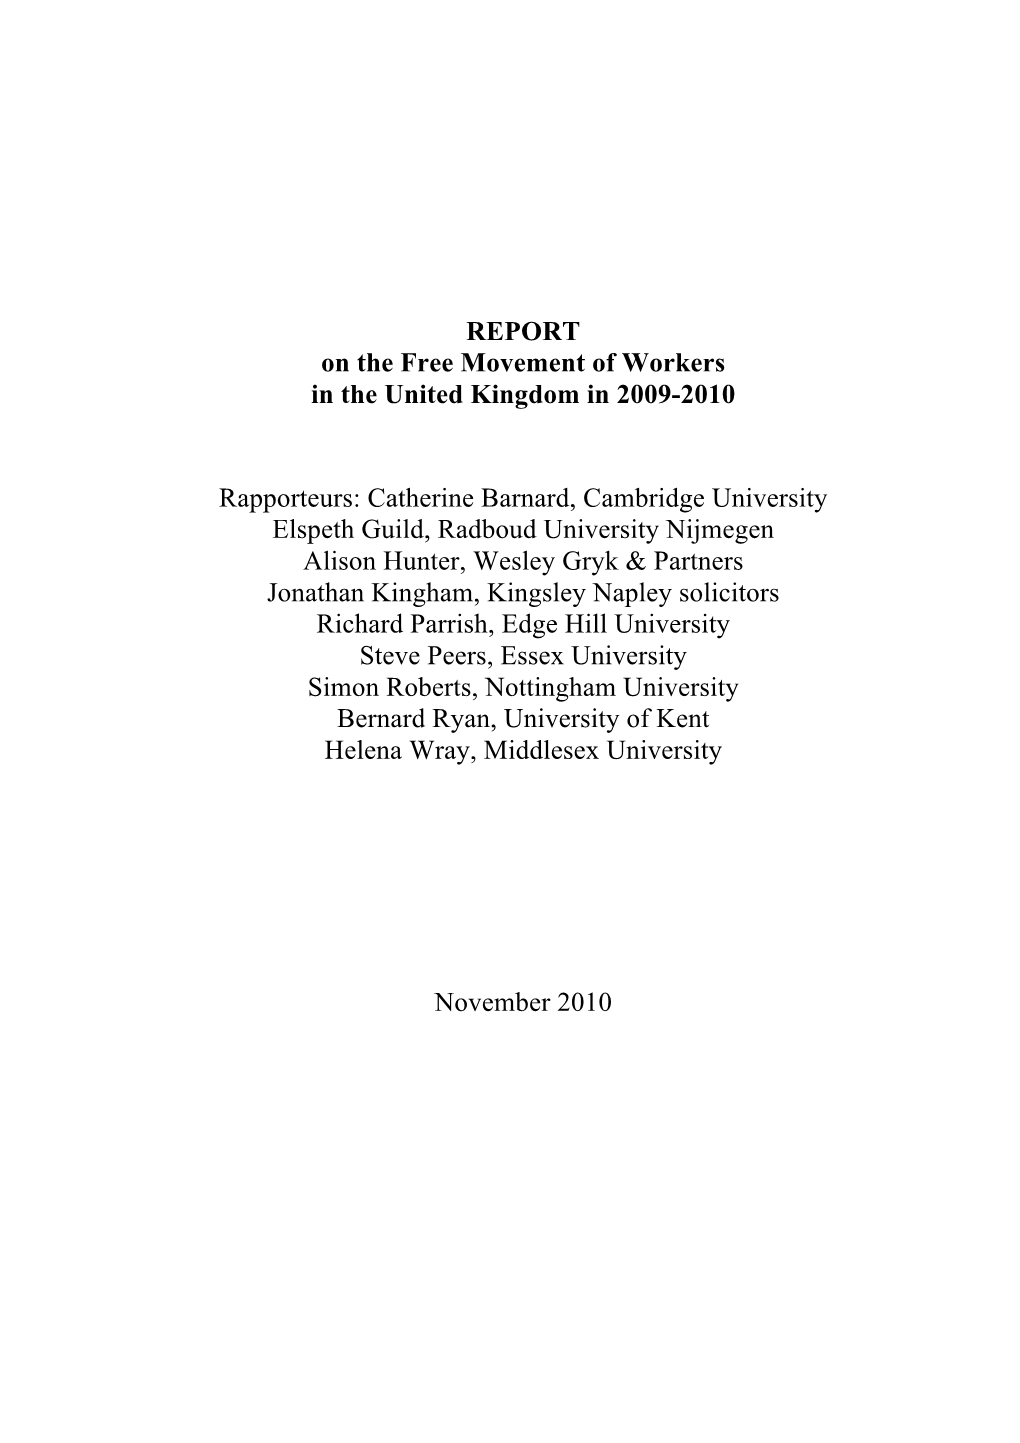 REPORT on the Free Movement of Workers in the United Kingdom in 2009-2010